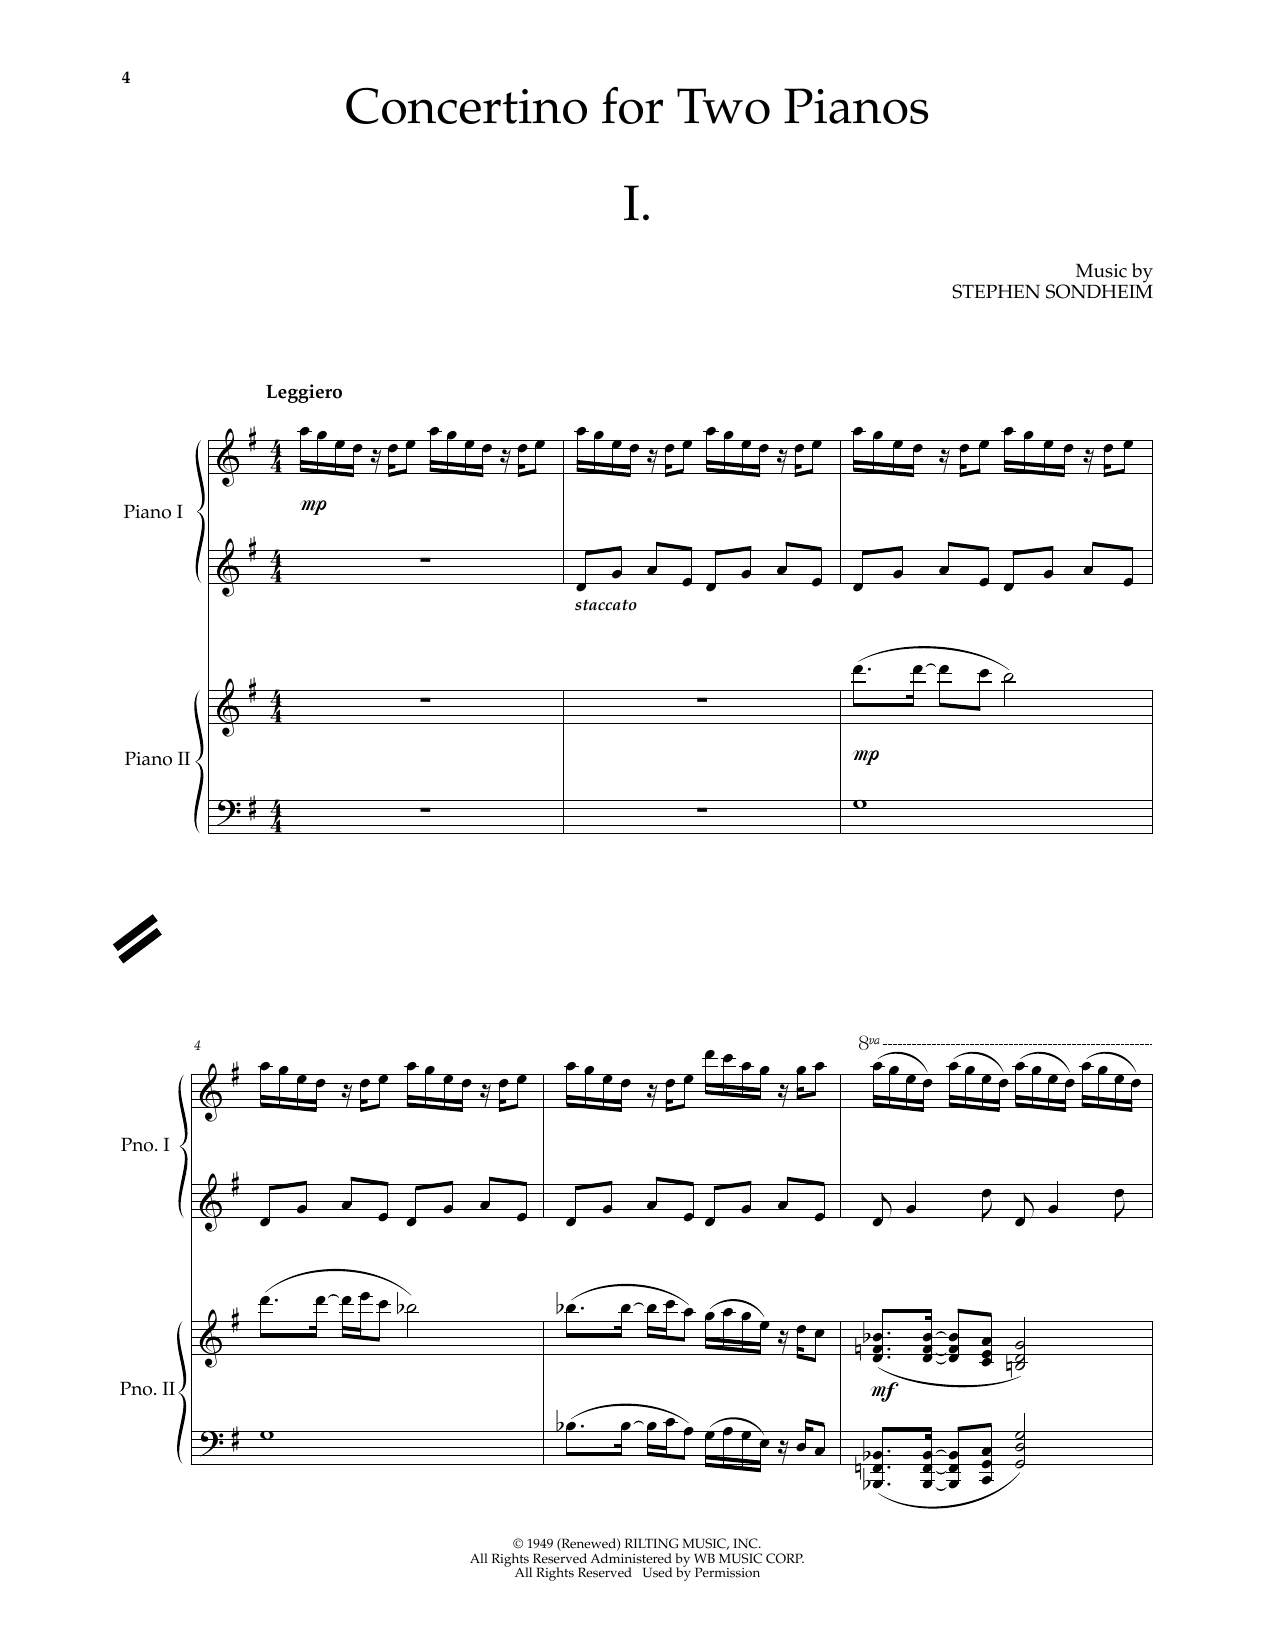 Download Stephen Sondheim Concertino For Two Pianos Sheet Music